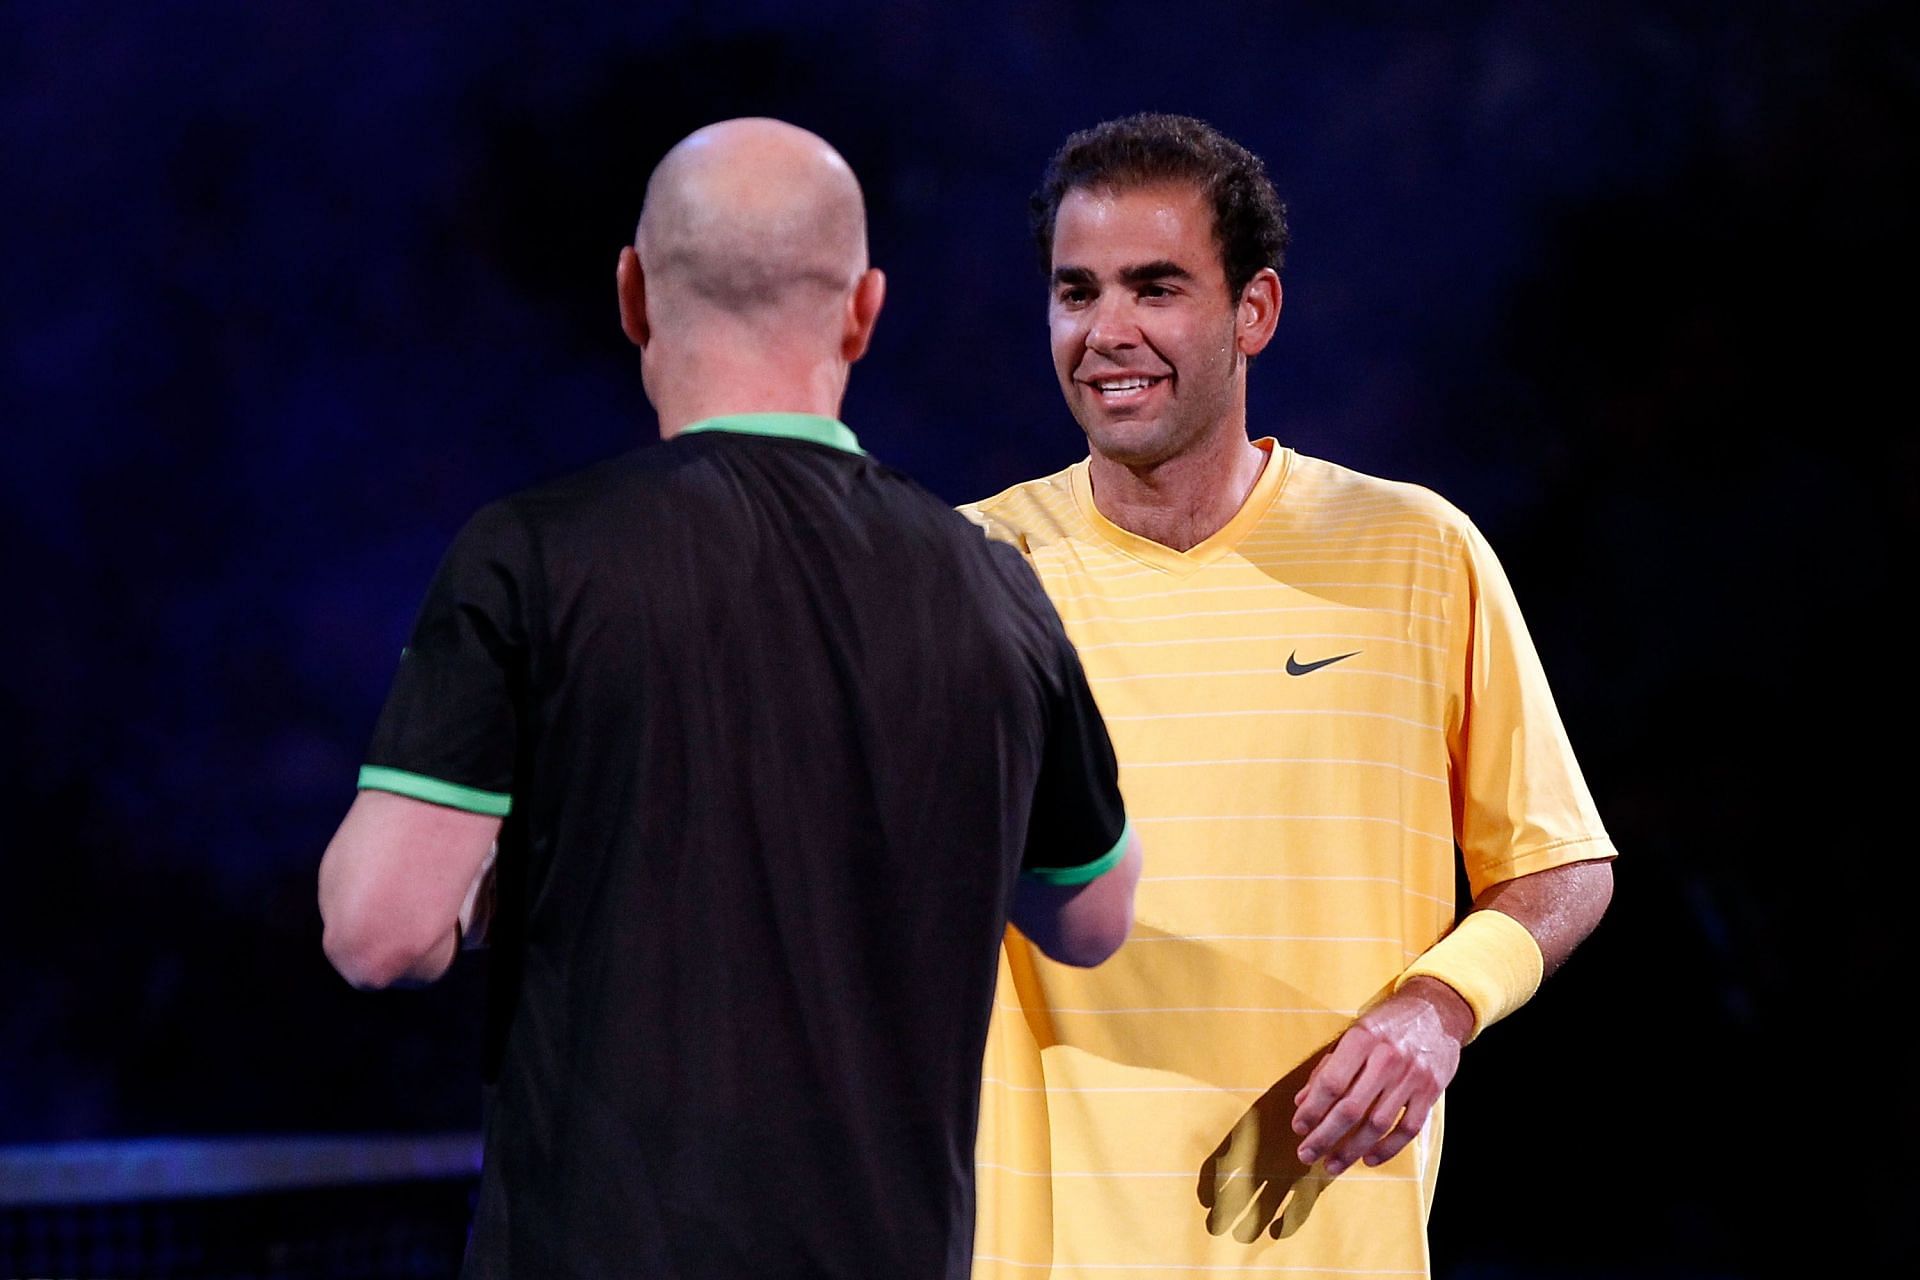 Andre Agassi (L) and Pete Sampras pictured at the 2011 BNP Paribas Showdown